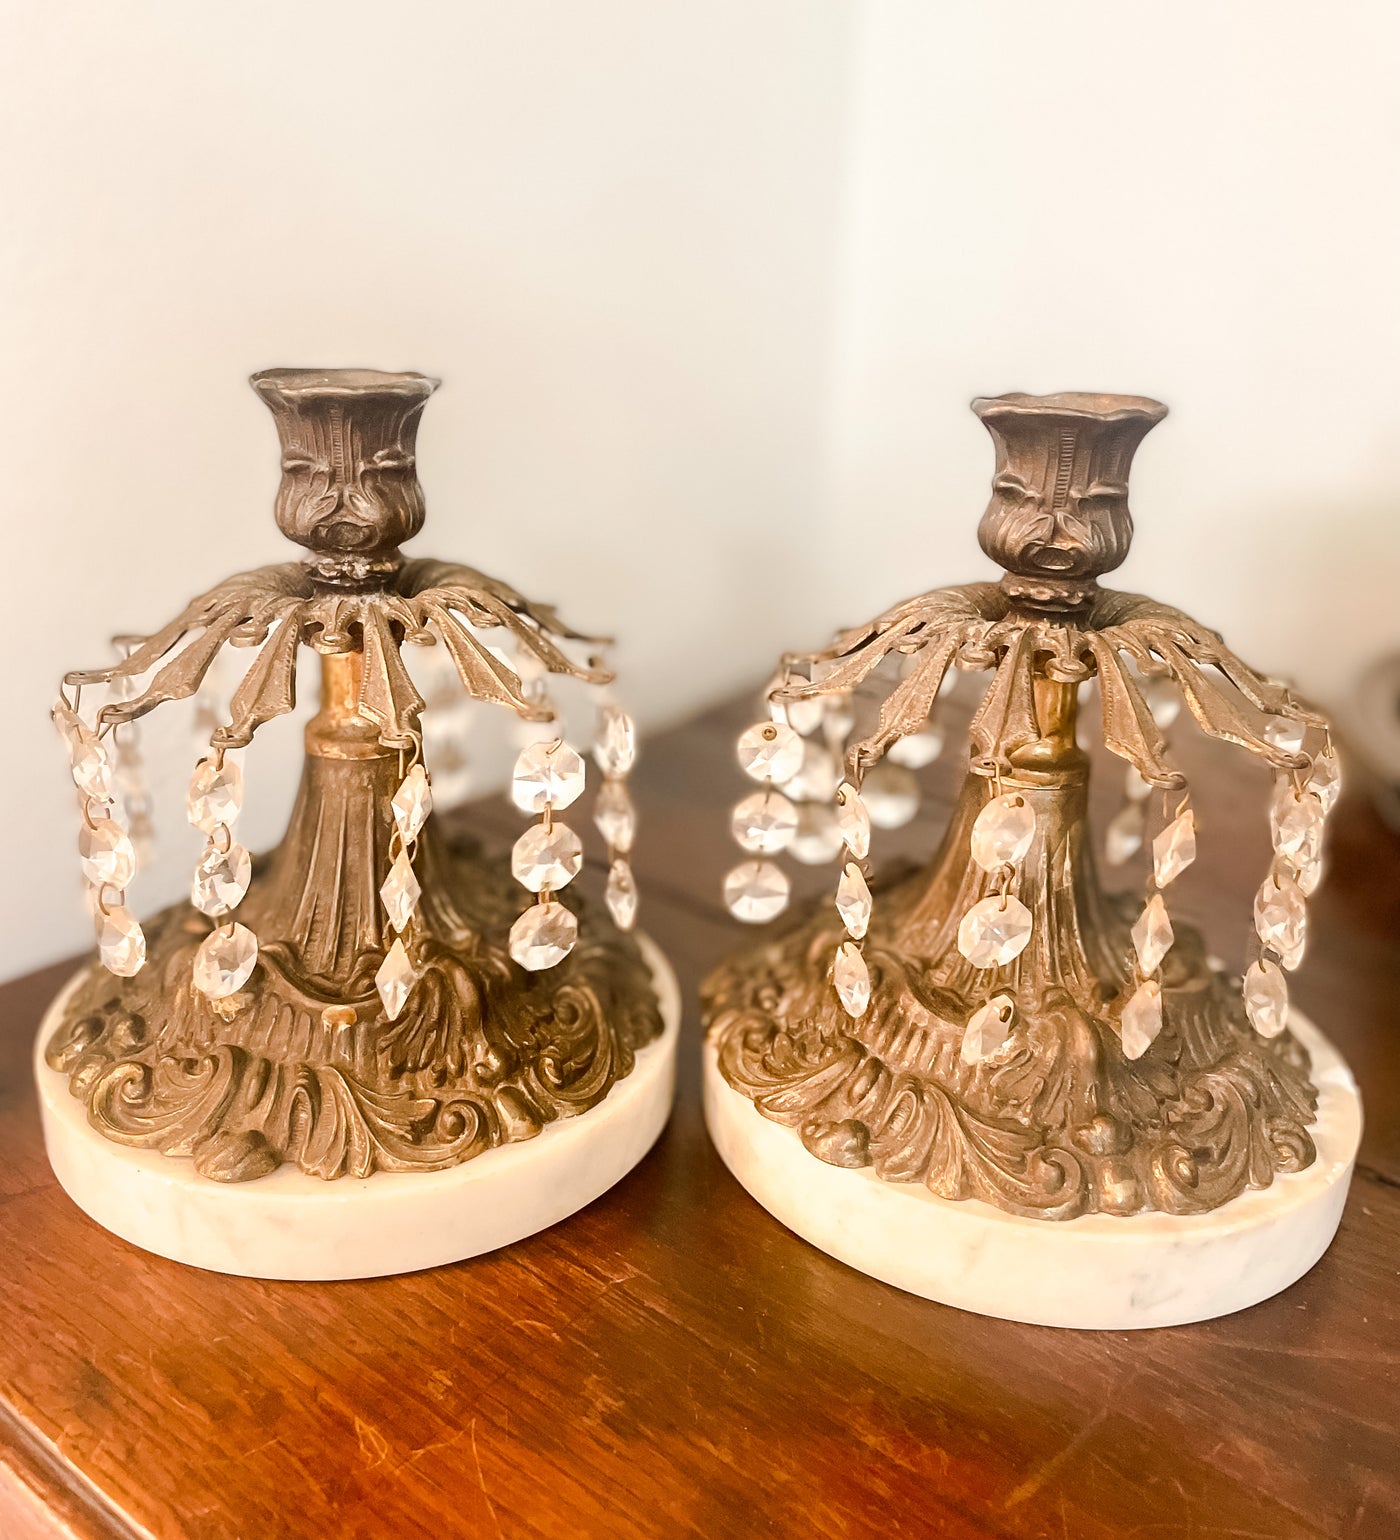 Pair of Antique Brass & Marble French Candle Holders